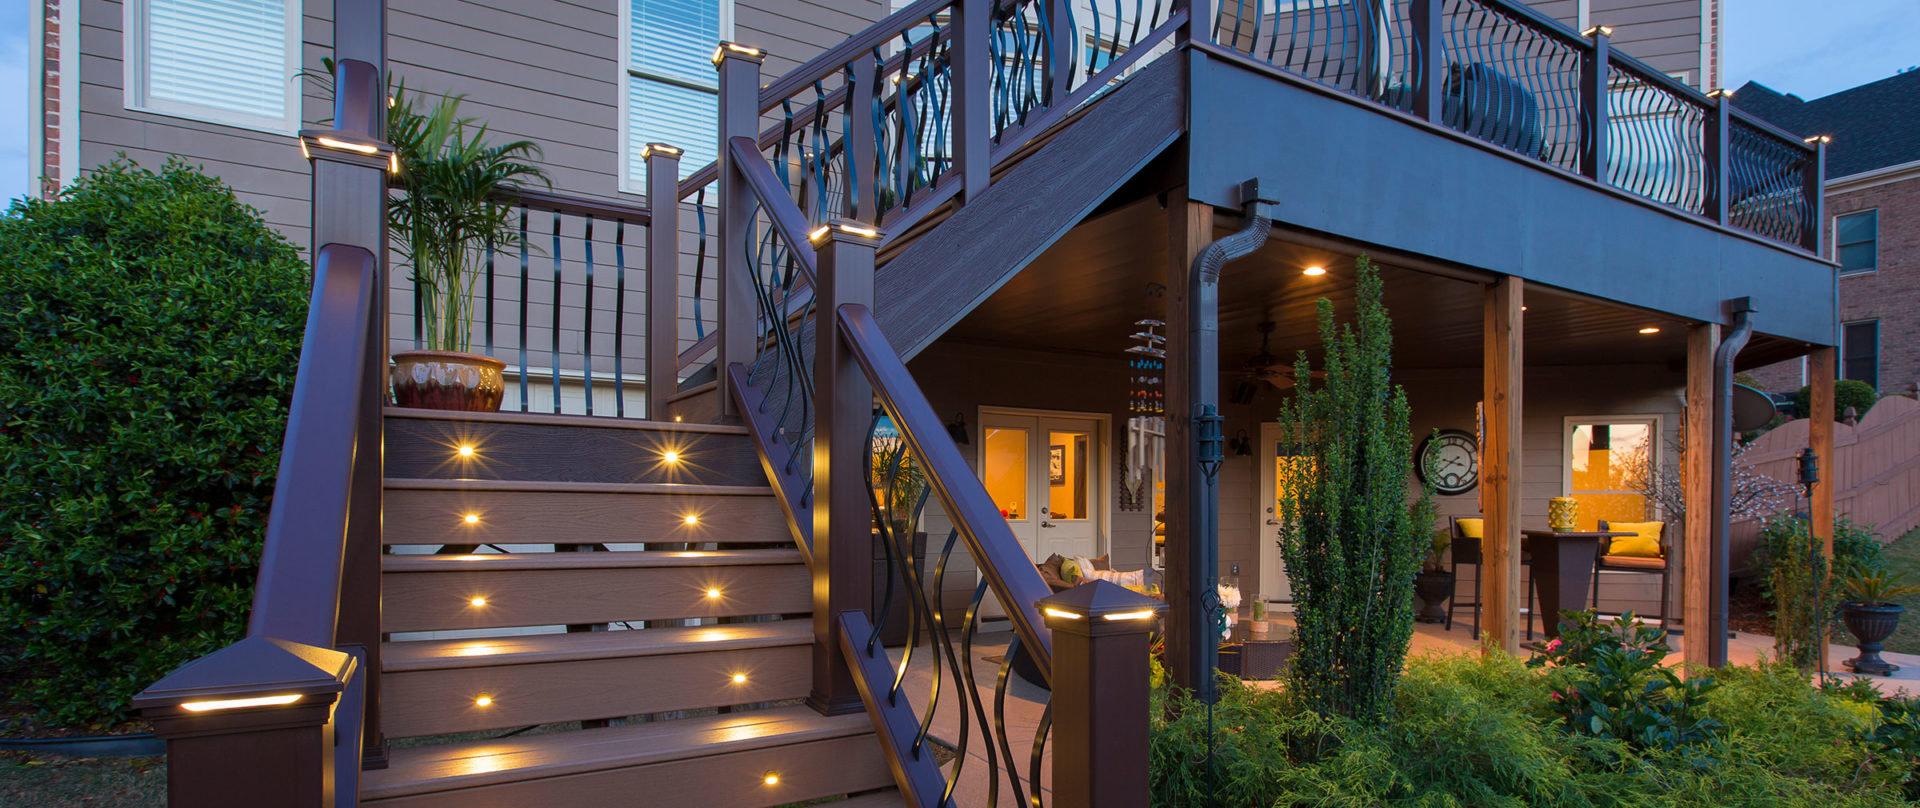 outdoor stairs to deck